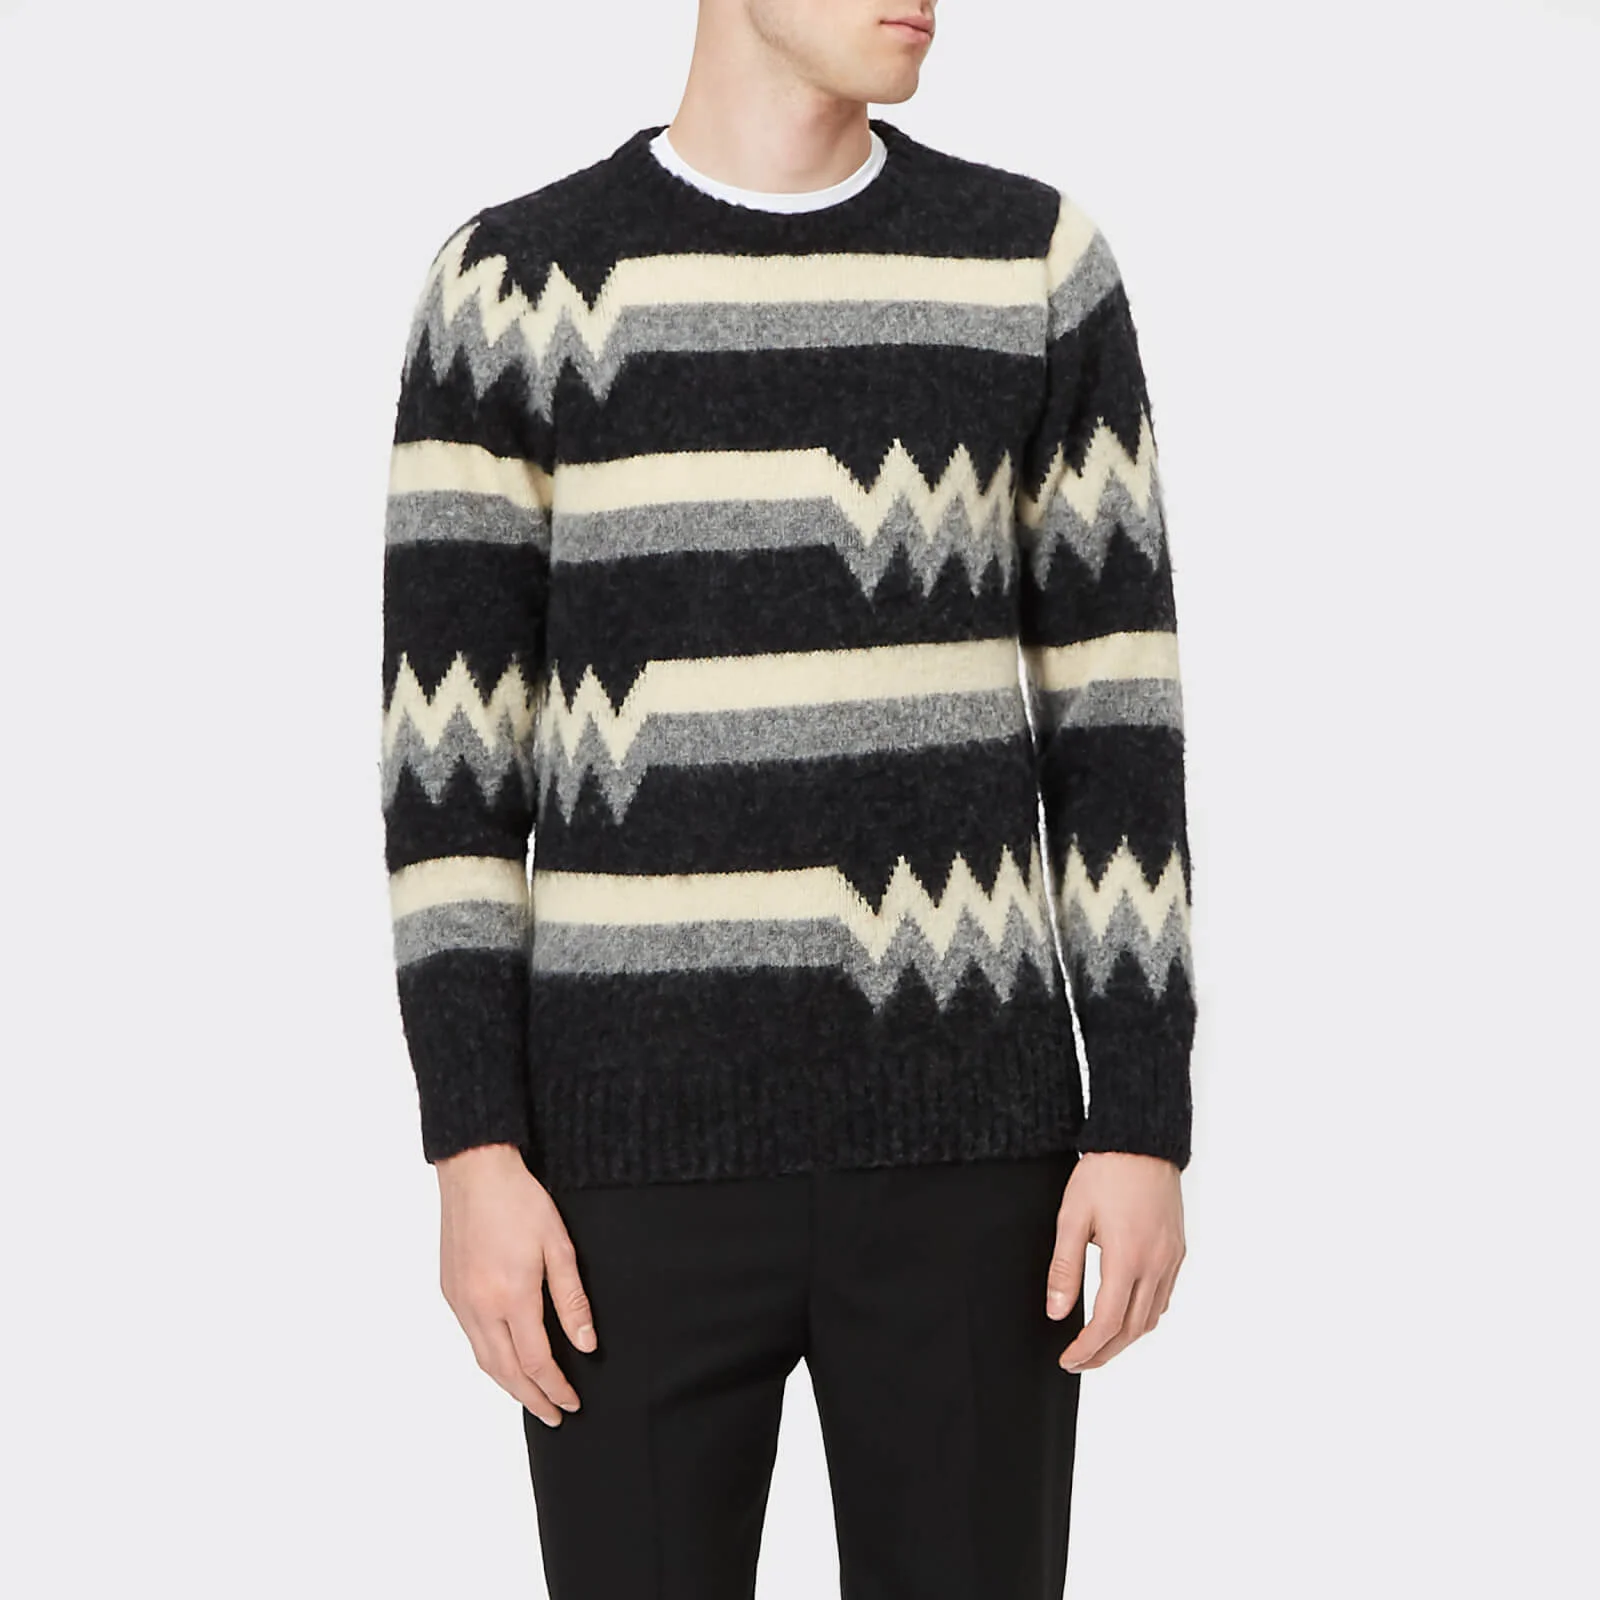 Howlin' Men's Patterned Crew Neck Knitted Jumper - Charcoal Image 1